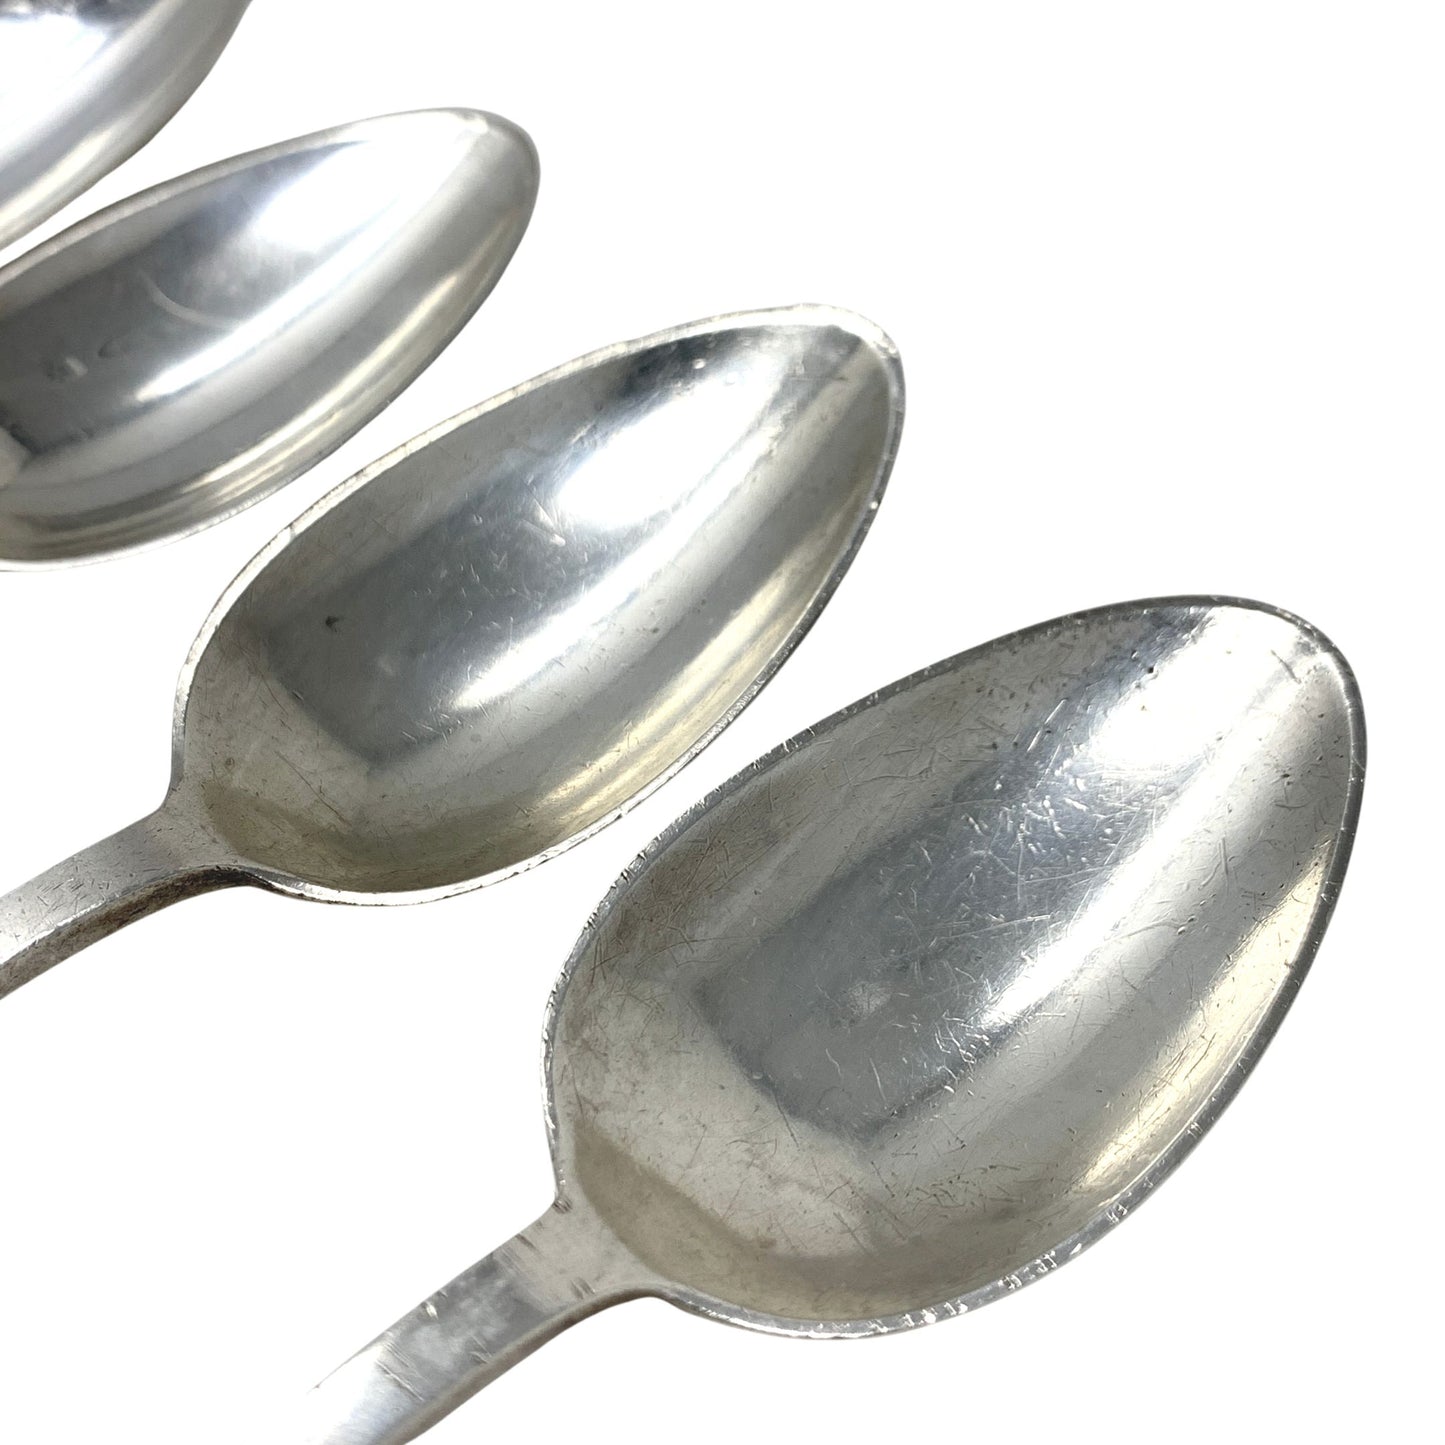 Tiffany & Co Sterling “Faneuil” Teaspoons (5)